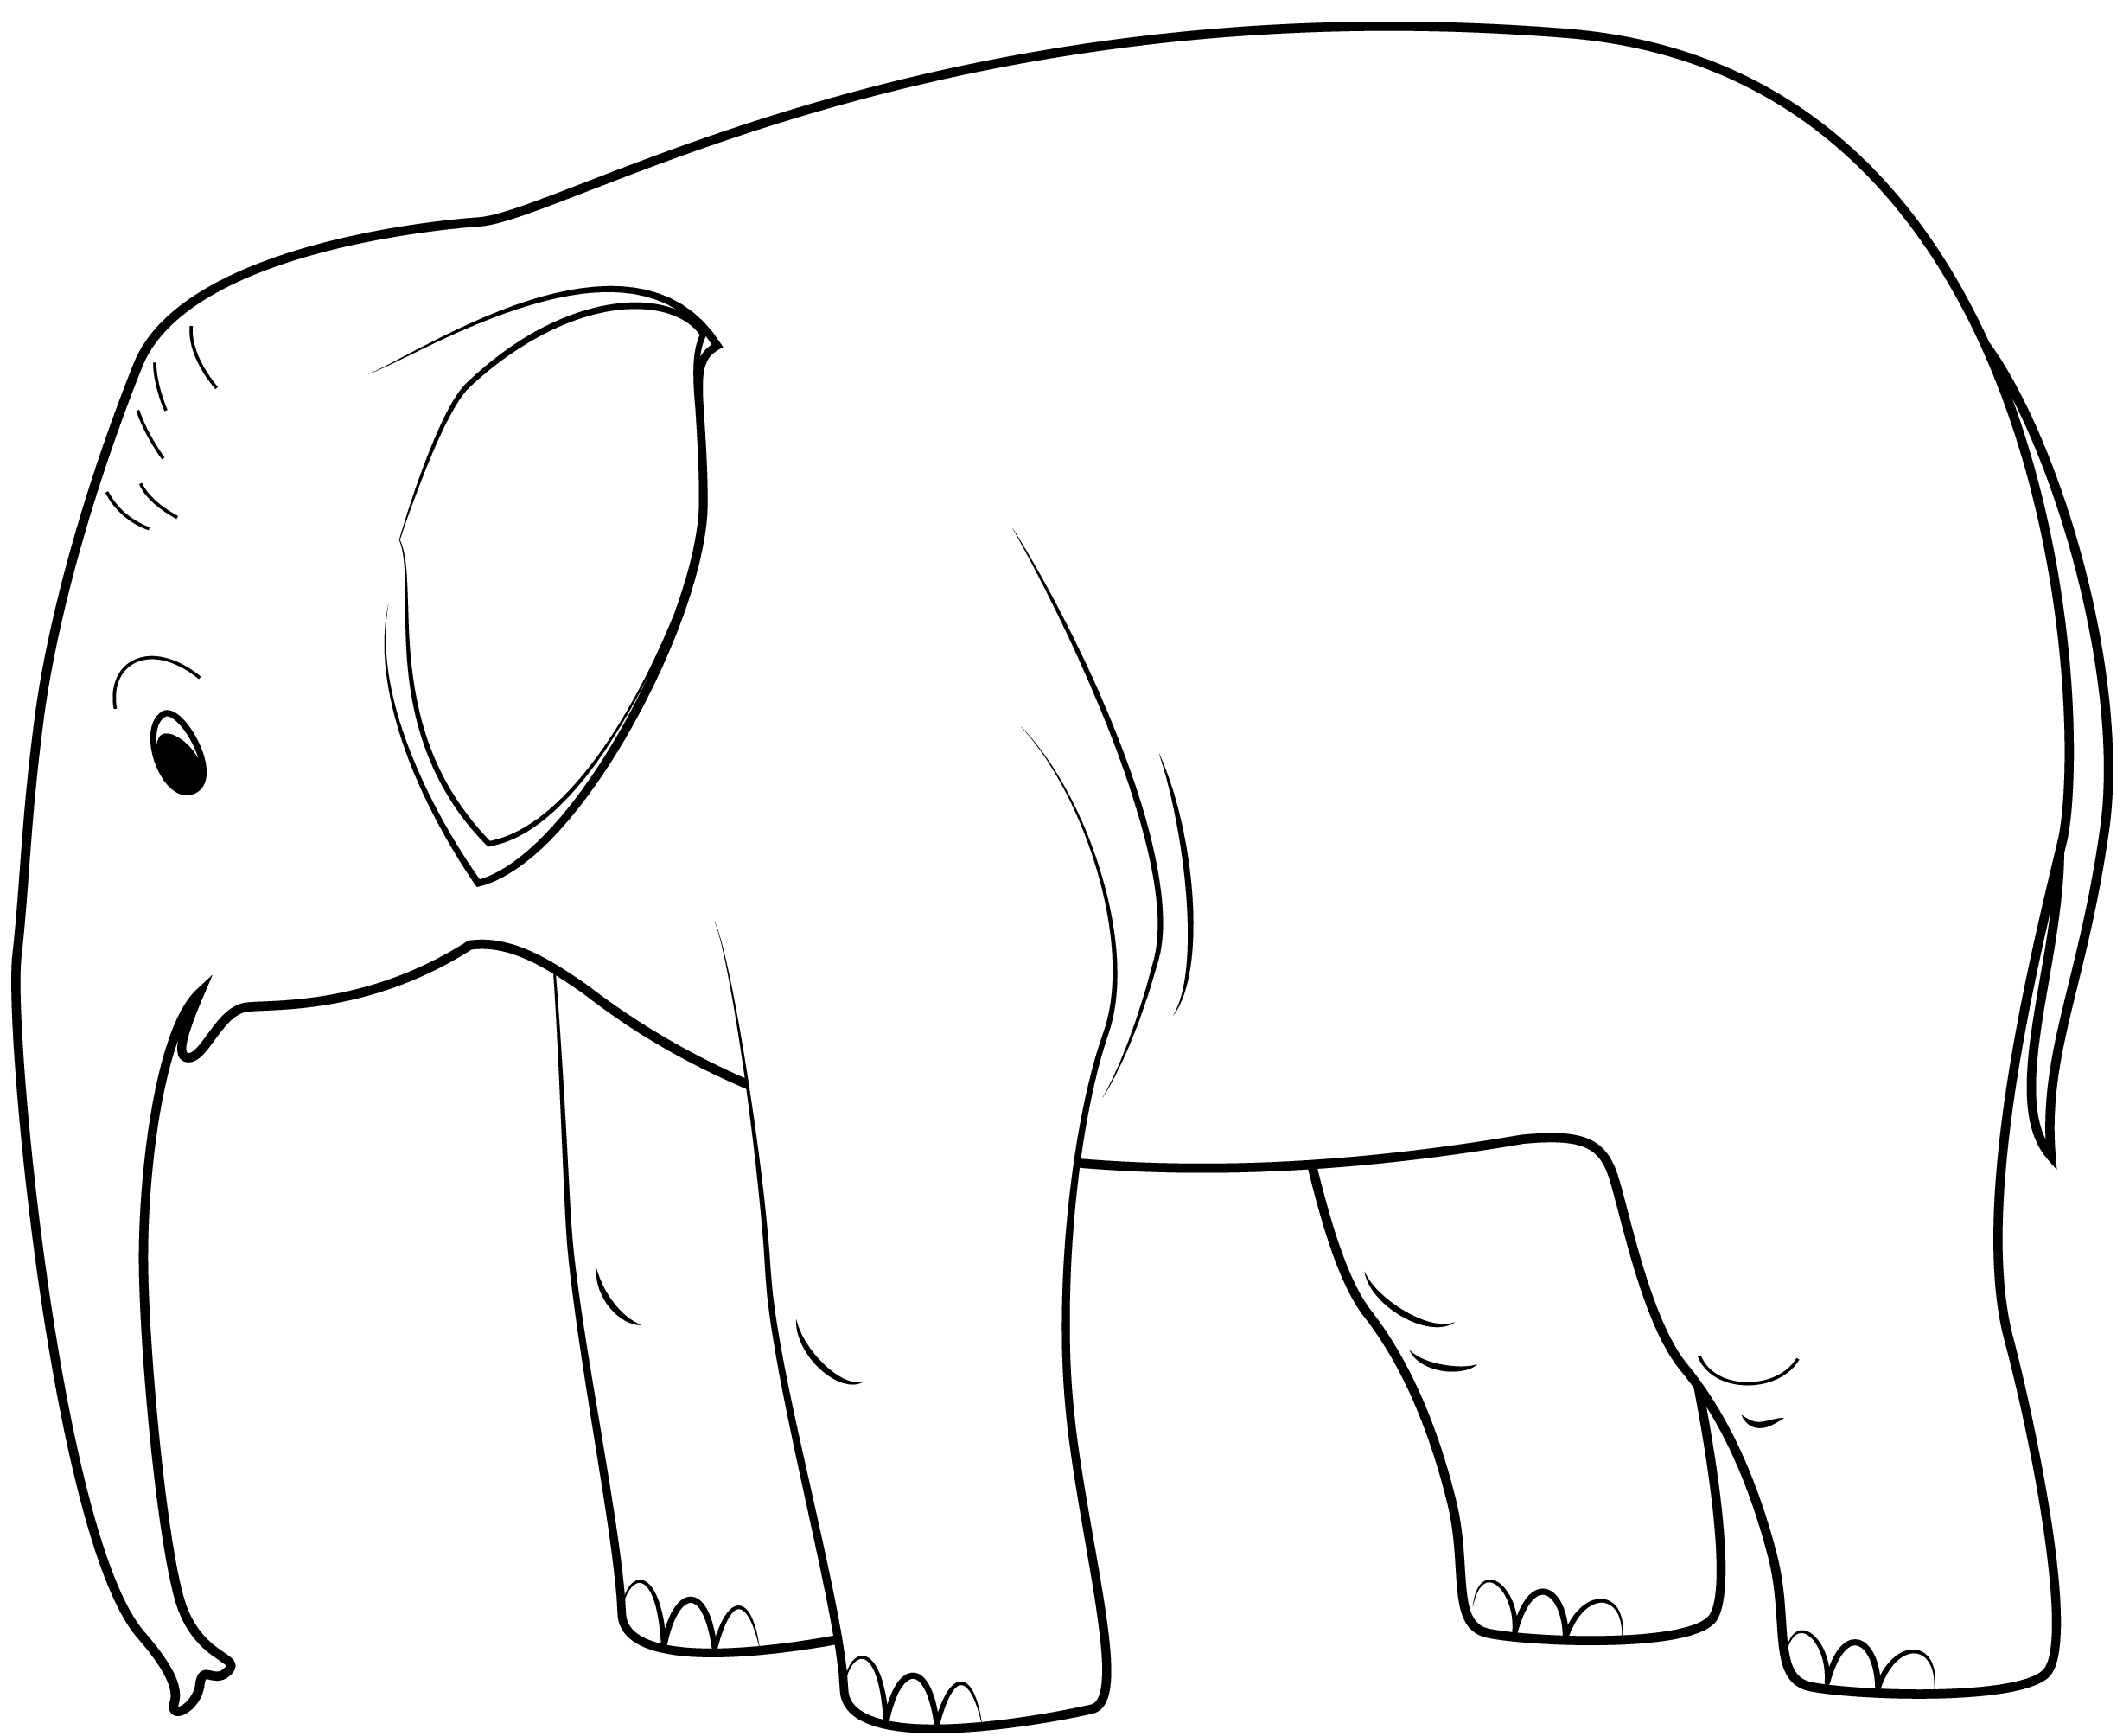 cut-out-free-printable-baby-elephant-template-alittlemisslawyer